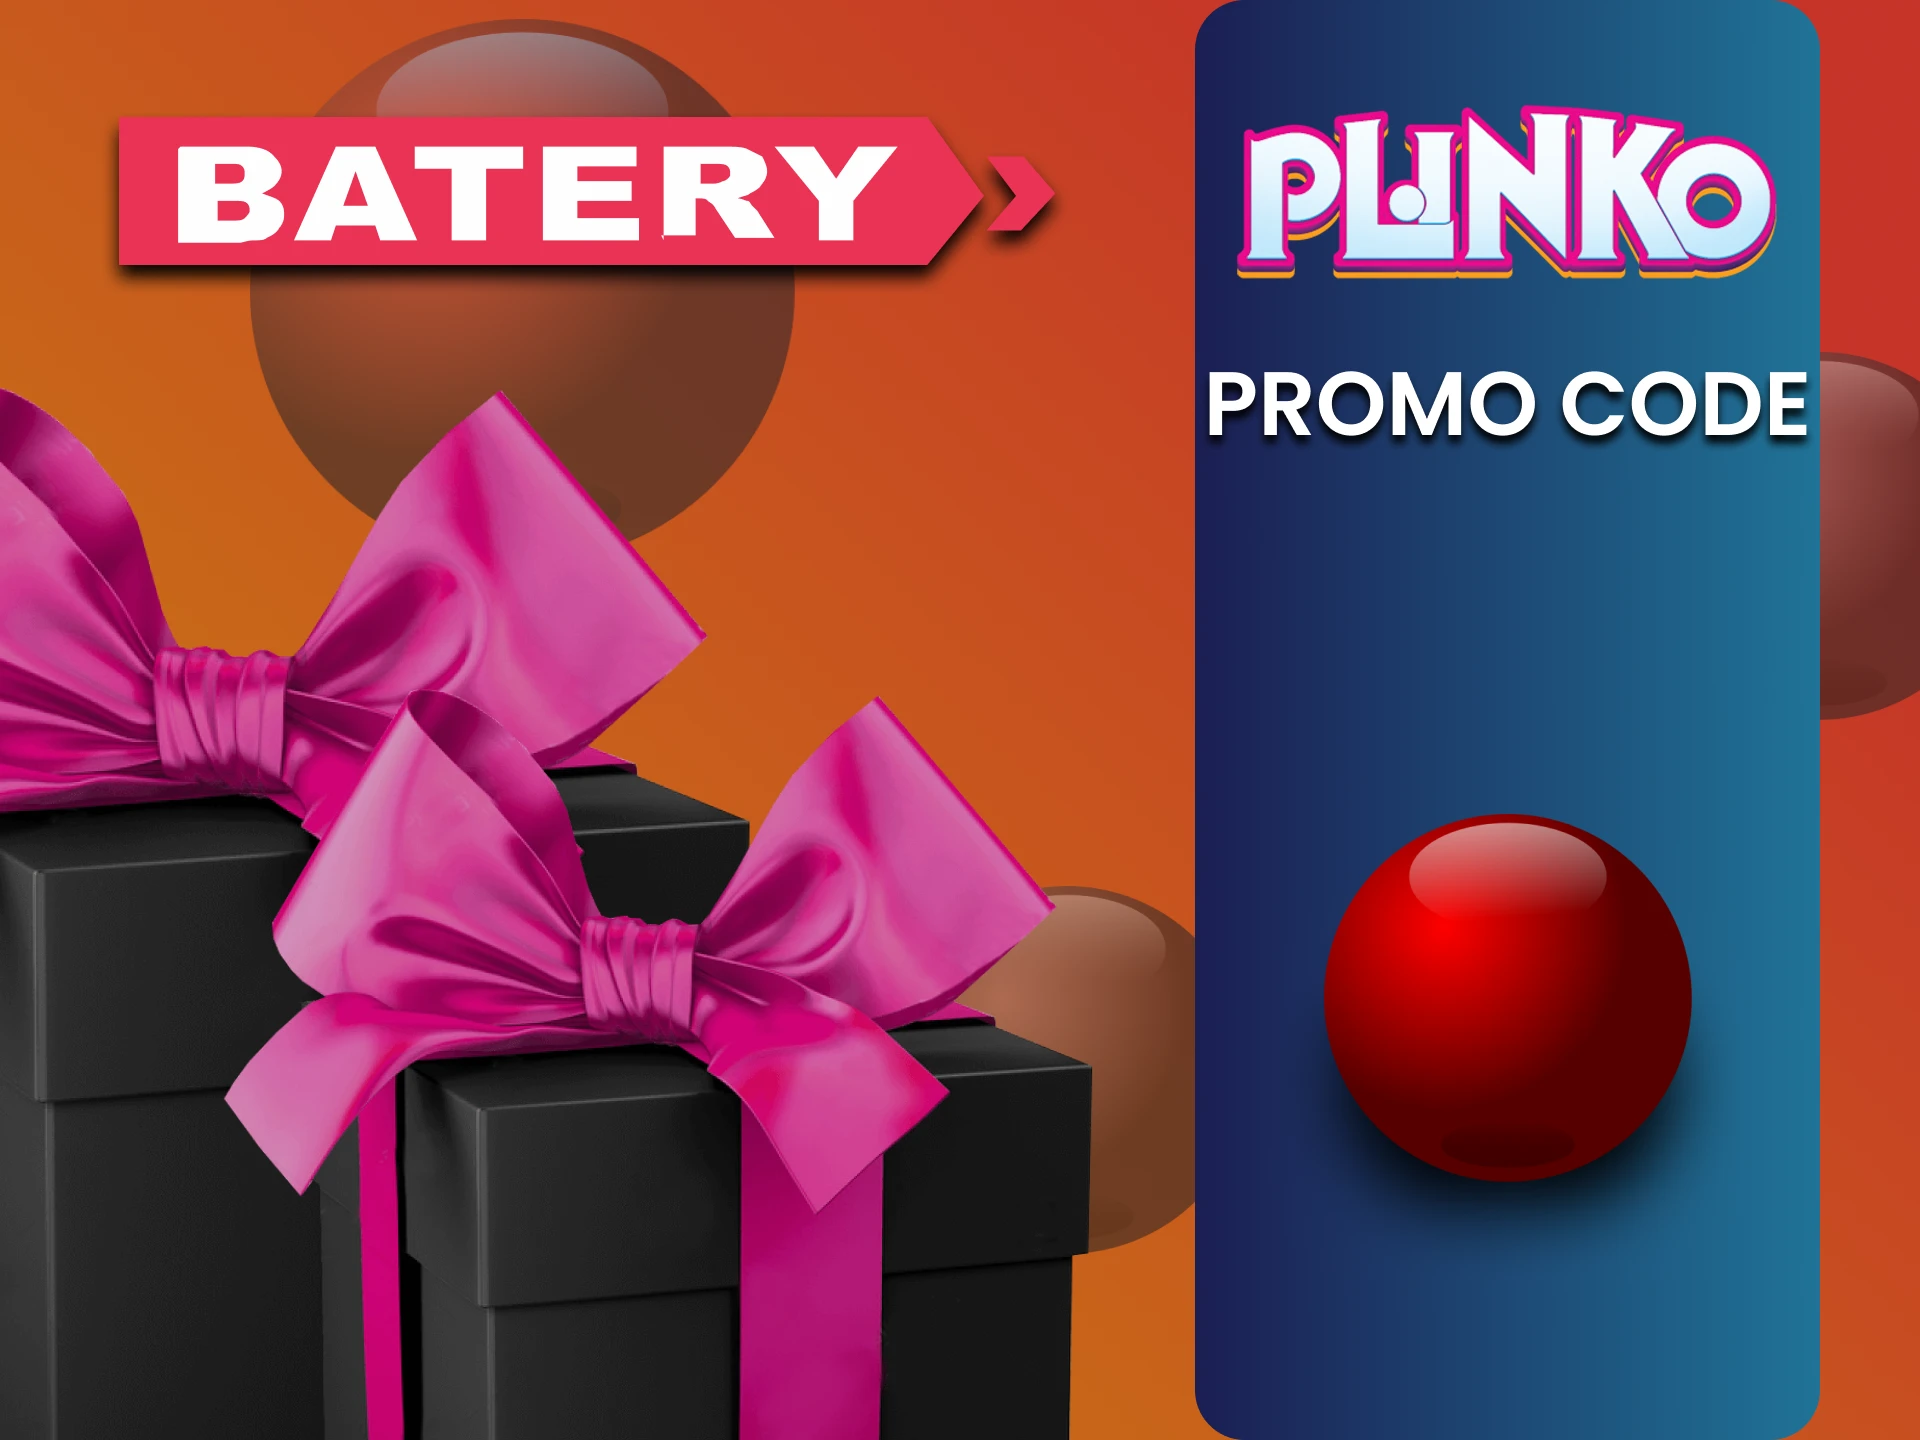 Apply the Batery Plinko promo codes and take advantage of the welcome offer.